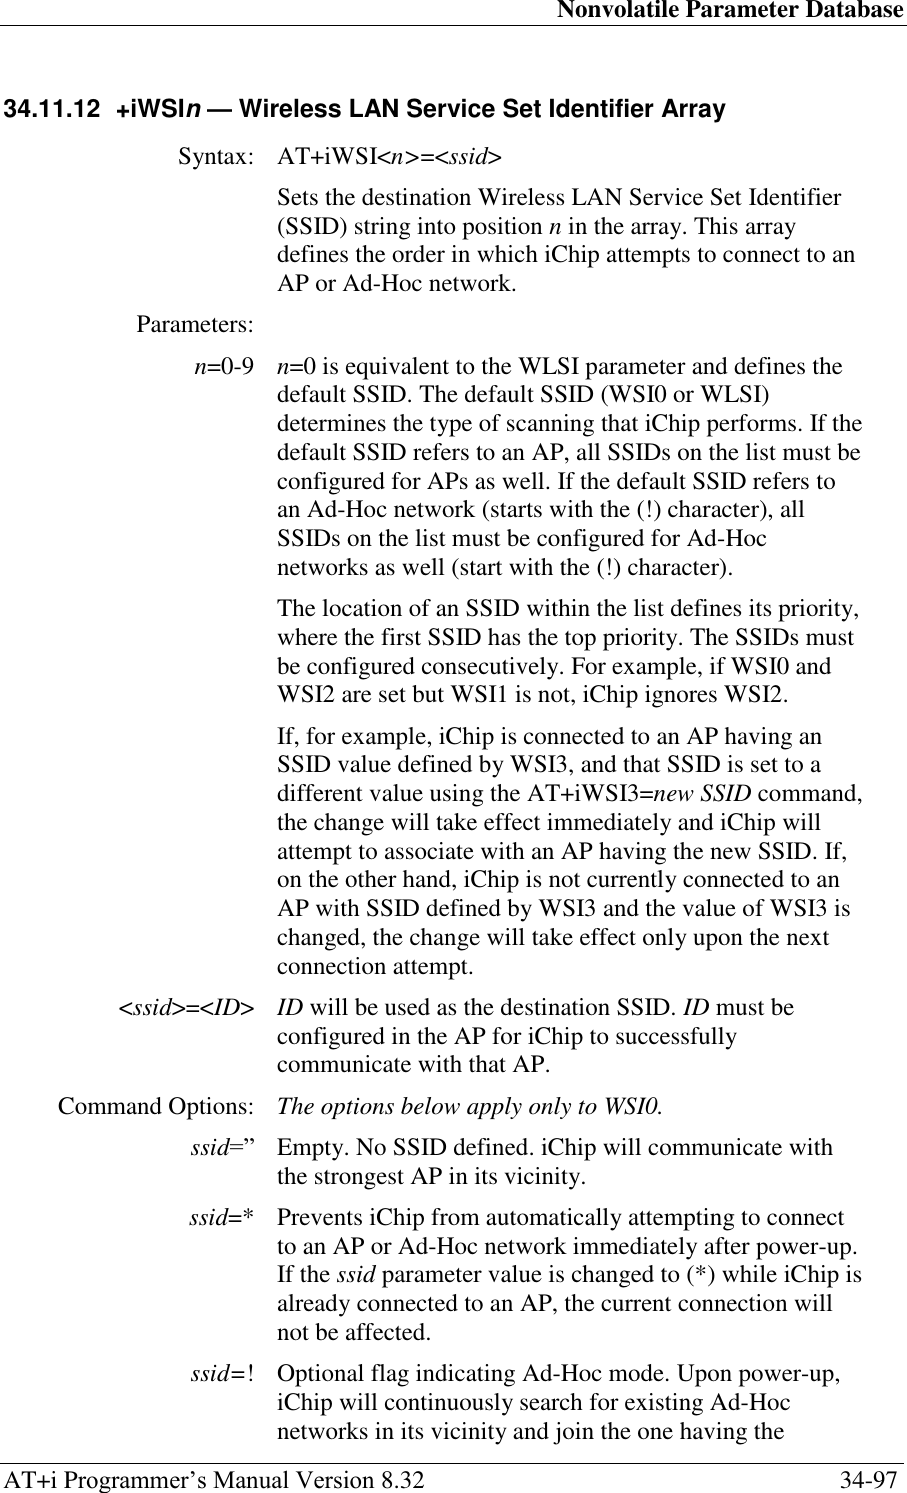 Nonvolatile Parameter Database AT+i Programmer‘s Manual Version 8.32  34-97 34.11.12  +iWSIn — Wireless LAN Service Set Identifier Array  Syntax: AT+iWSI&lt;n&gt;=&lt;ssid&gt;  Sets the destination Wireless LAN Service Set Identifier (SSID) string into position n in the array. This array defines the order in which iChip attempts to connect to an AP or Ad-Hoc network. Parameters:  n=0-9 n=0 is equivalent to the WLSI parameter and defines the default SSID. The default SSID (WSI0 or WLSI) determines the type of scanning that iChip performs. If the default SSID refers to an AP, all SSIDs on the list must be configured for APs as well. If the default SSID refers to an Ad-Hoc network (starts with the (!) character), all SSIDs on the list must be configured for Ad-Hoc networks as well (start with the (!) character). The location of an SSID within the list defines its priority, where the first SSID has the top priority. The SSIDs must be configured consecutively. For example, if WSI0 and WSI2 are set but WSI1 is not, iChip ignores WSI2. If, for example, iChip is connected to an AP having an SSID value defined by WSI3, and that SSID is set to a different value using the AT+iWSI3=new SSID command, the change will take effect immediately and iChip will attempt to associate with an AP having the new SSID. If, on the other hand, iChip is not currently connected to an AP with SSID defined by WSI3 and the value of WSI3 is changed, the change will take effect only upon the next connection attempt. &lt;ssid&gt;=&lt;ID&gt; ID will be used as the destination SSID. ID must be configured in the AP for iChip to successfully communicate with that AP. Command Options: The options below apply only to WSI0. ssid=‖ Empty. No SSID defined. iChip will communicate with the strongest AP in its vicinity. ssid=* Prevents iChip from automatically attempting to connect to an AP or Ad-Hoc network immediately after power-up. If the ssid parameter value is changed to (*) while iChip is already connected to an AP, the current connection will not be affected. ssid=! Optional flag indicating Ad-Hoc mode. Upon power-up, iChip will continuously search for existing Ad-Hoc networks in its vicinity and join the one having the 